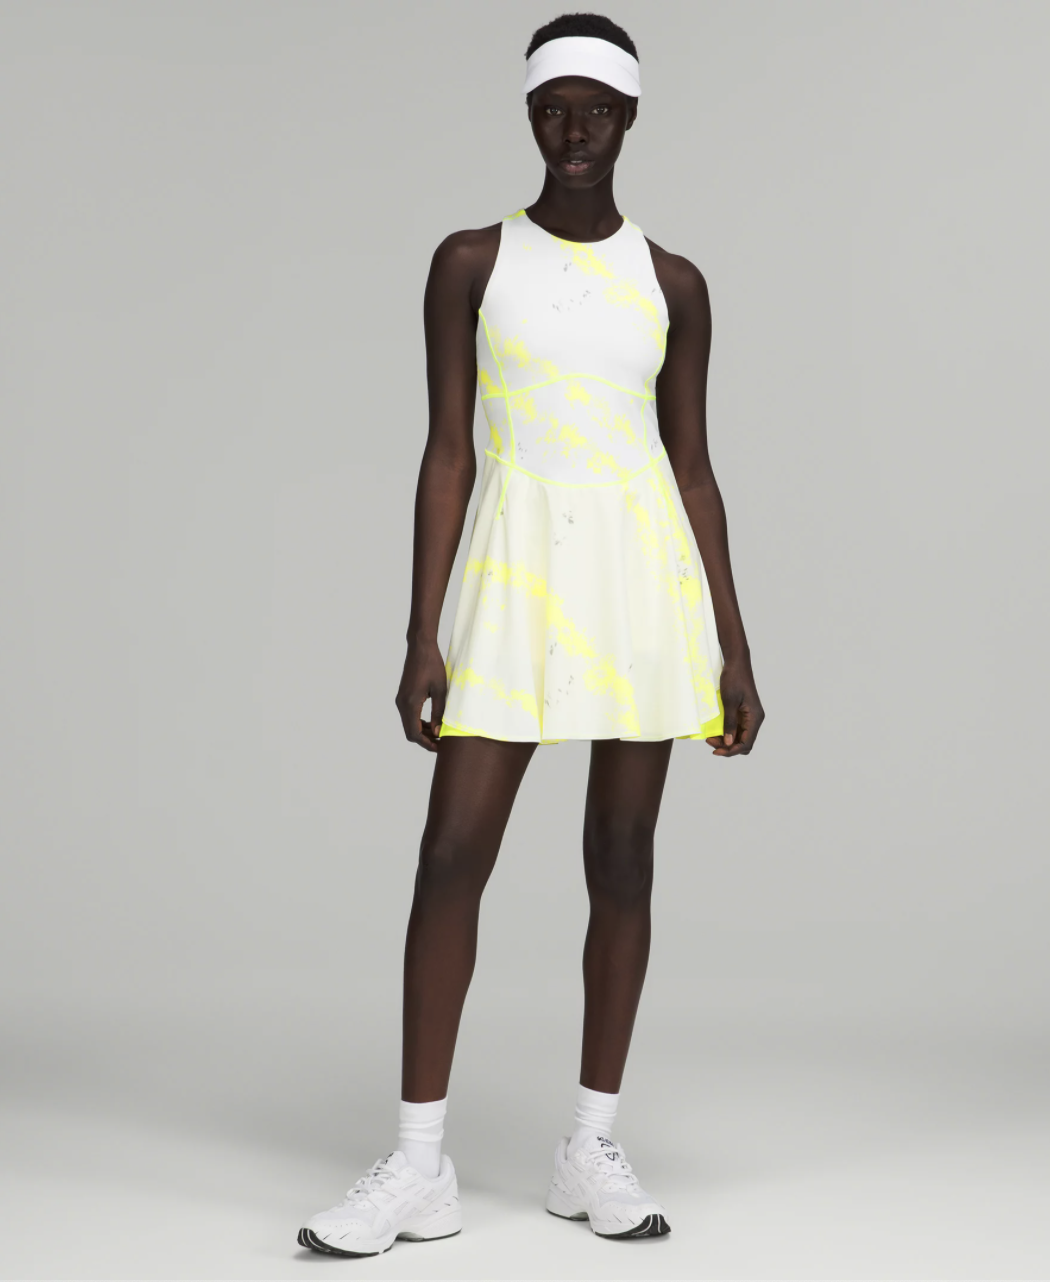 a person wearing the tennis dress